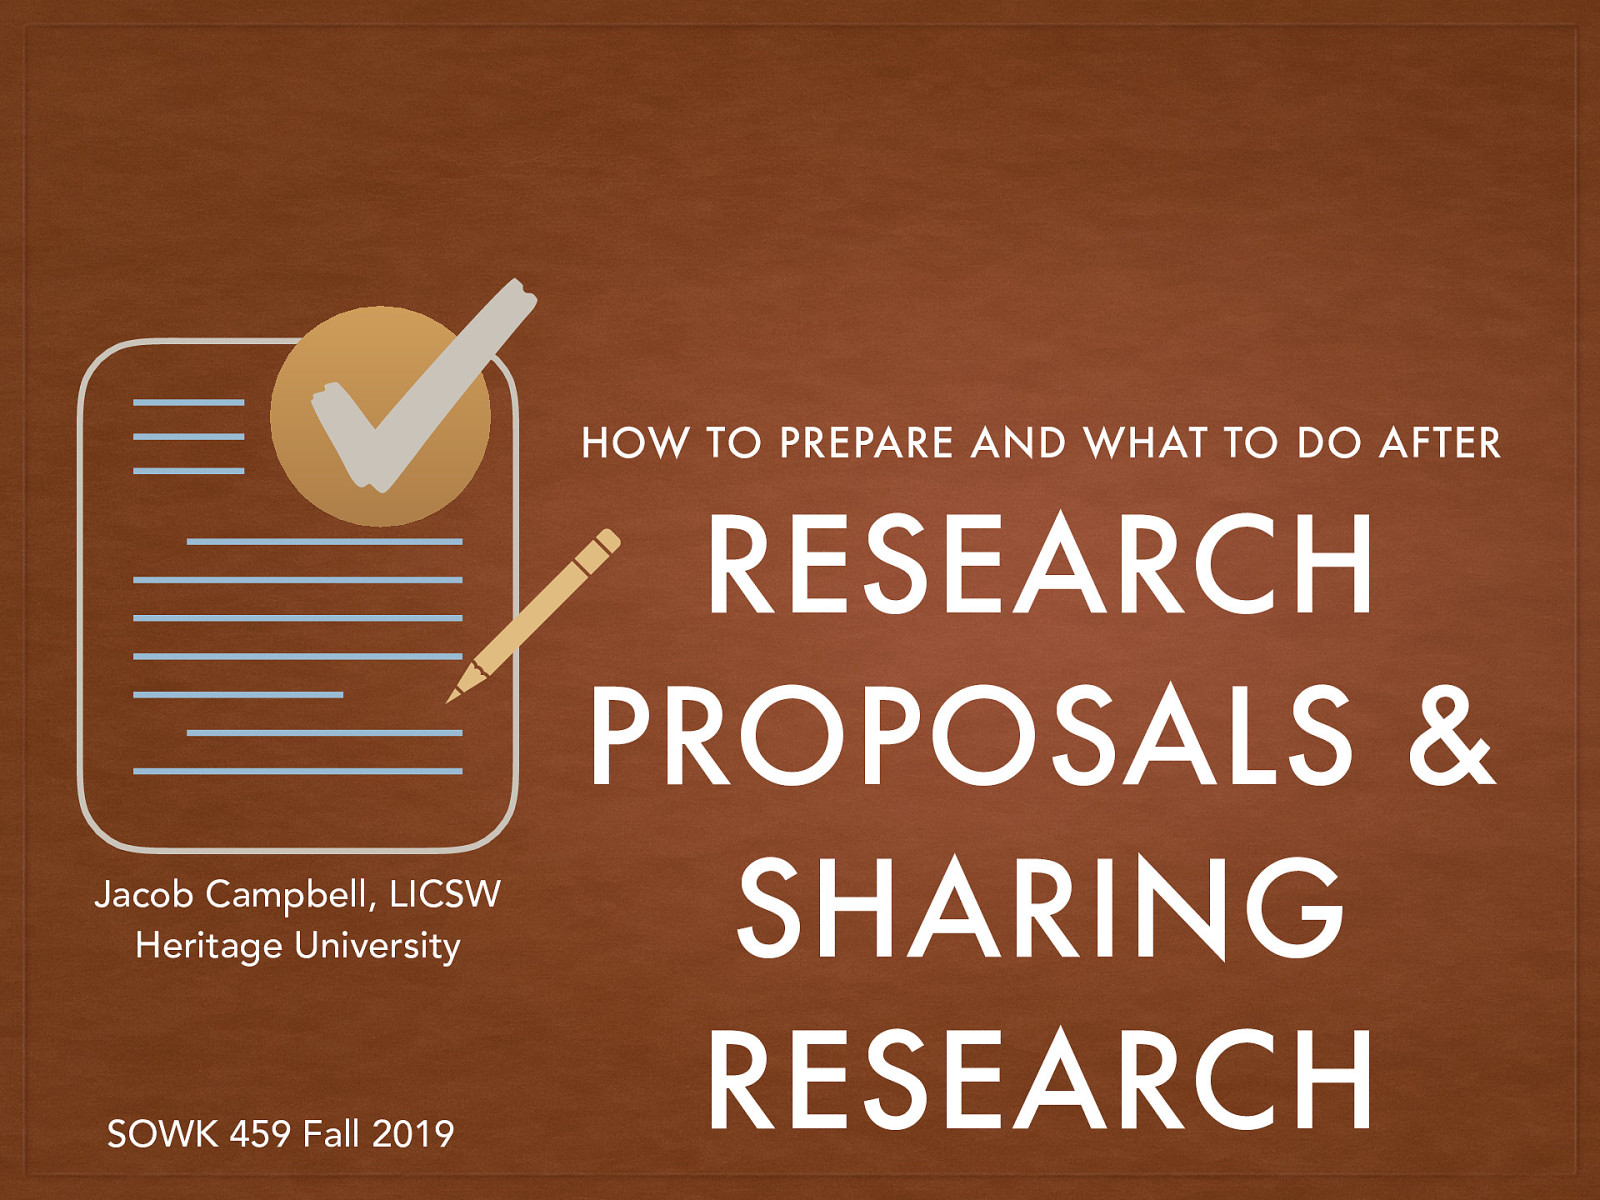 Week 13: Research Proposals & Sharing Research